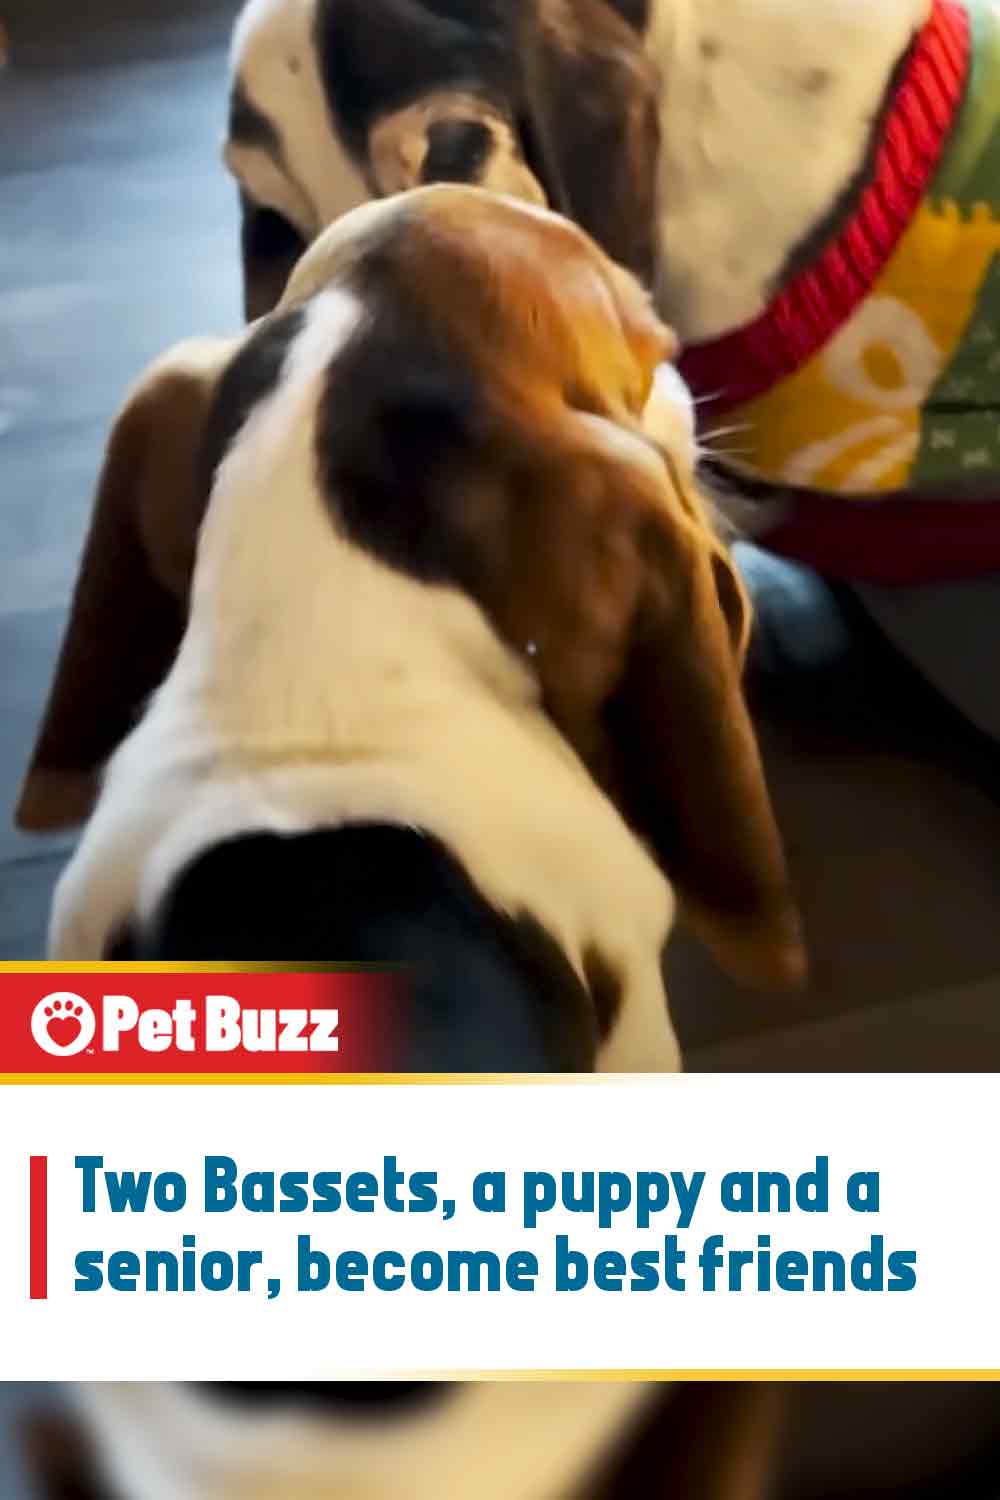 Two Bassets, a puppy and a senior, become best friends